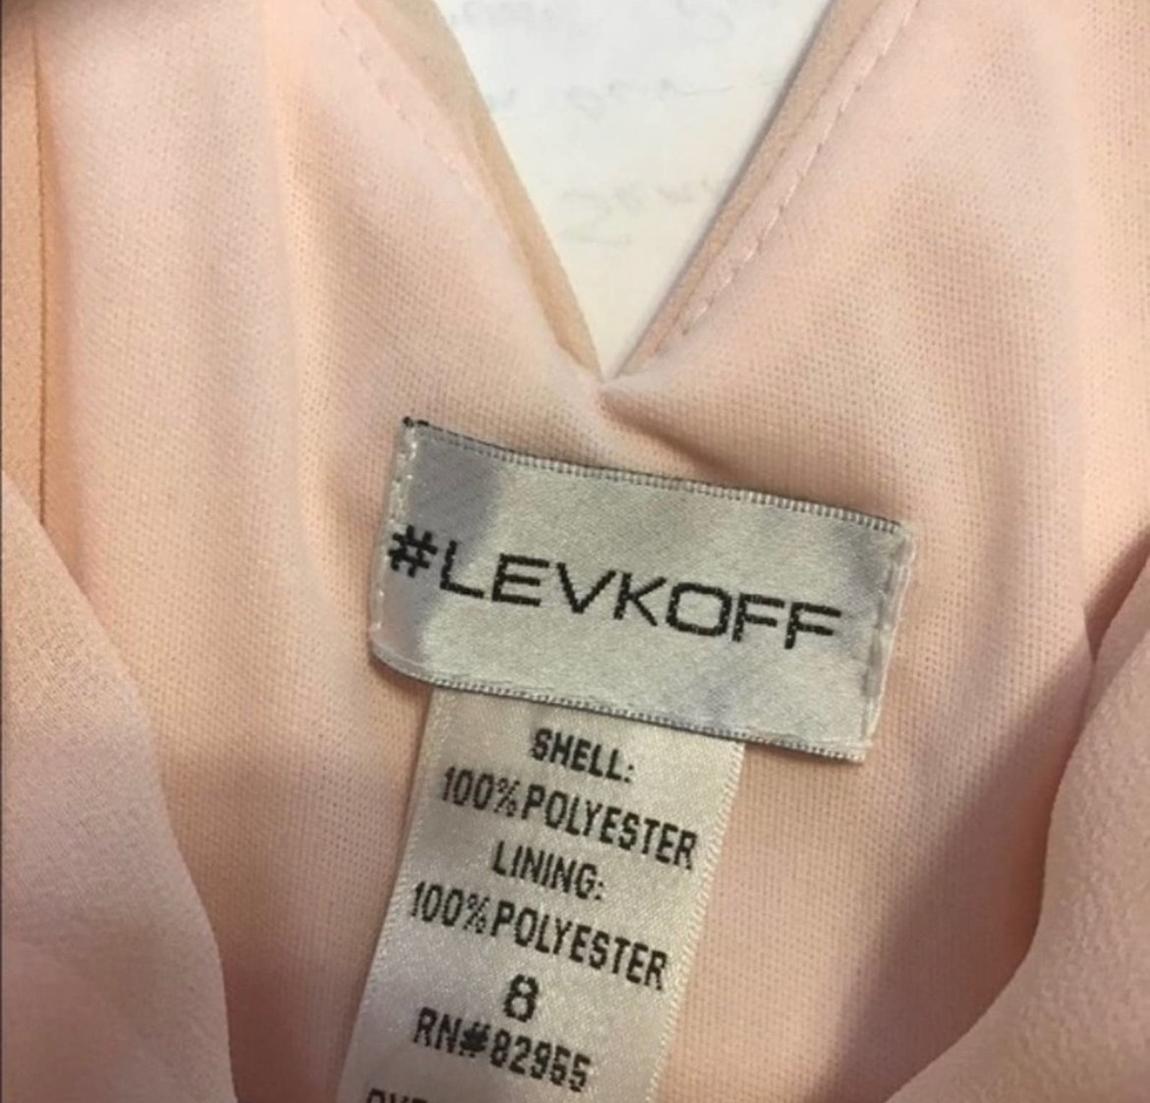 Bill Levkoff Size 8 Bridesmaid Light Pink A-line Dress on Queenly